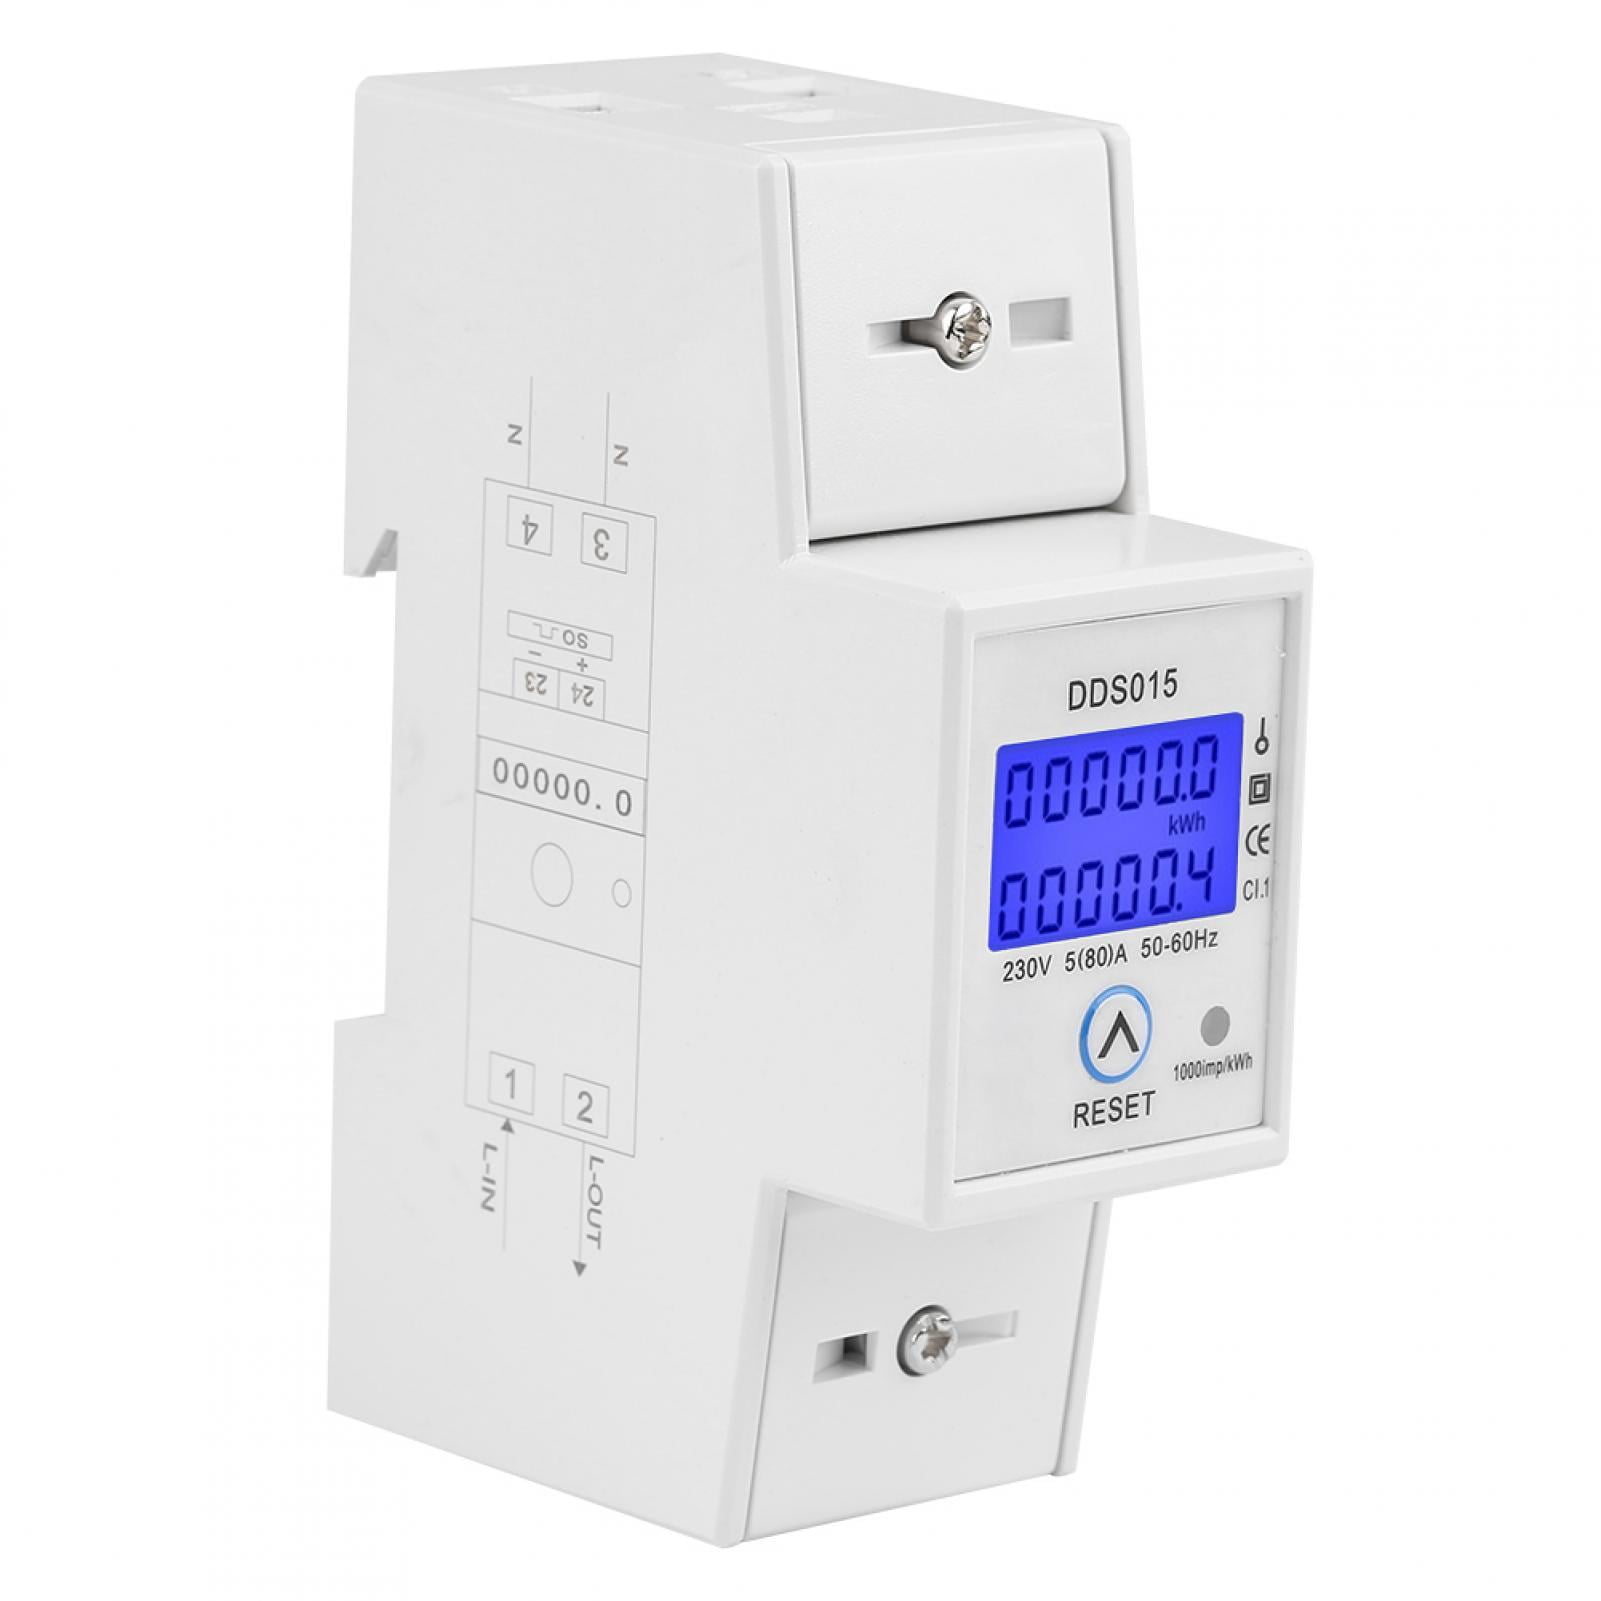 Electric Energy Meter 5-80A 230V 50Hz Digital LCD Single Phase Energy Consumption Wattmeter with DIN Rail Mounting DDS015